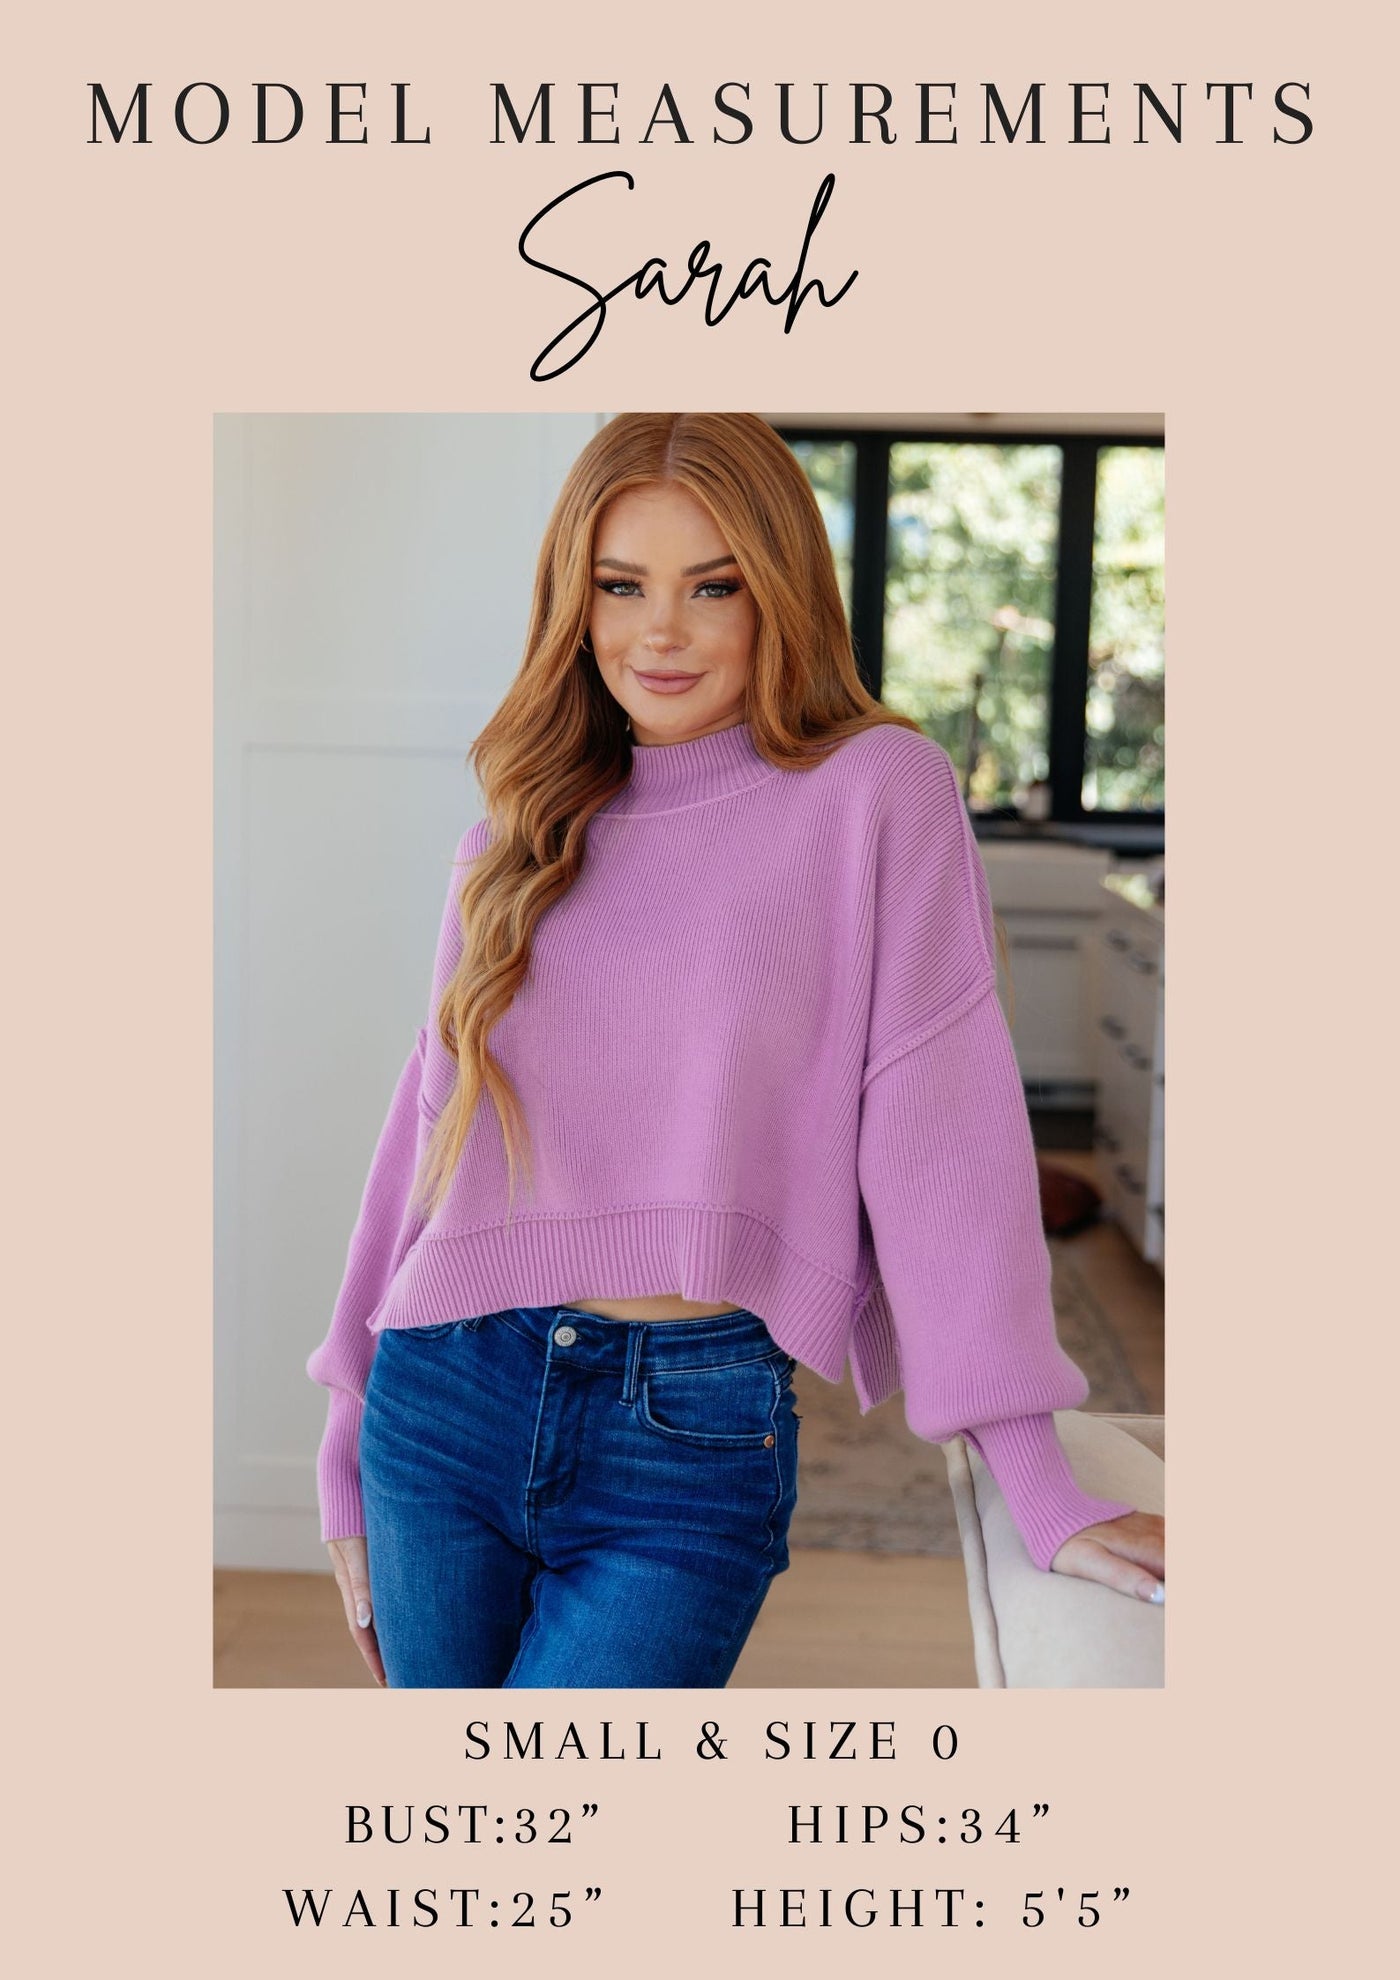 Snuggle up in our ultra-soft If I'm Picking Long Sleeve Tops. Perfect for cozy days or a chilly night out, these tops feature a dropped shoulder and easy fit, so you'll feel comfortable and stylish.